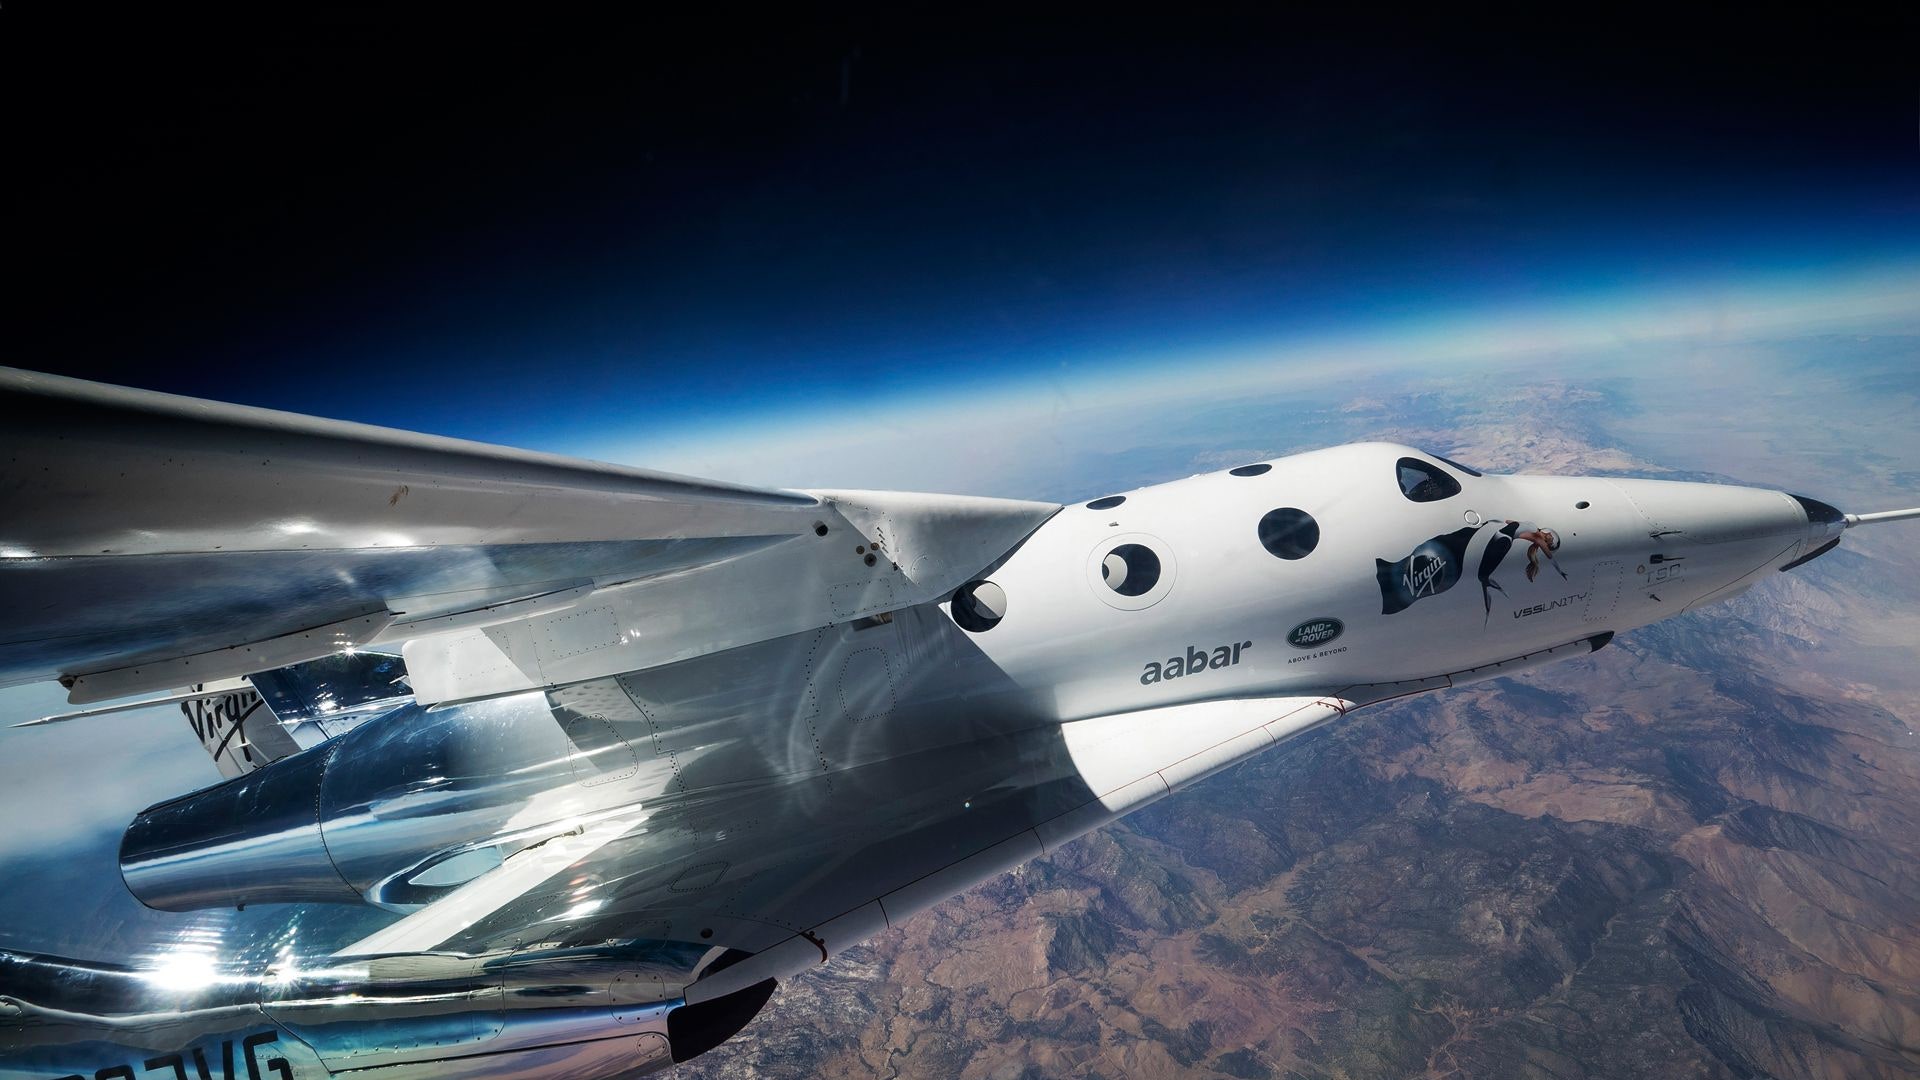 Virgin Galactic will create a plant to produce Delta spacecraft